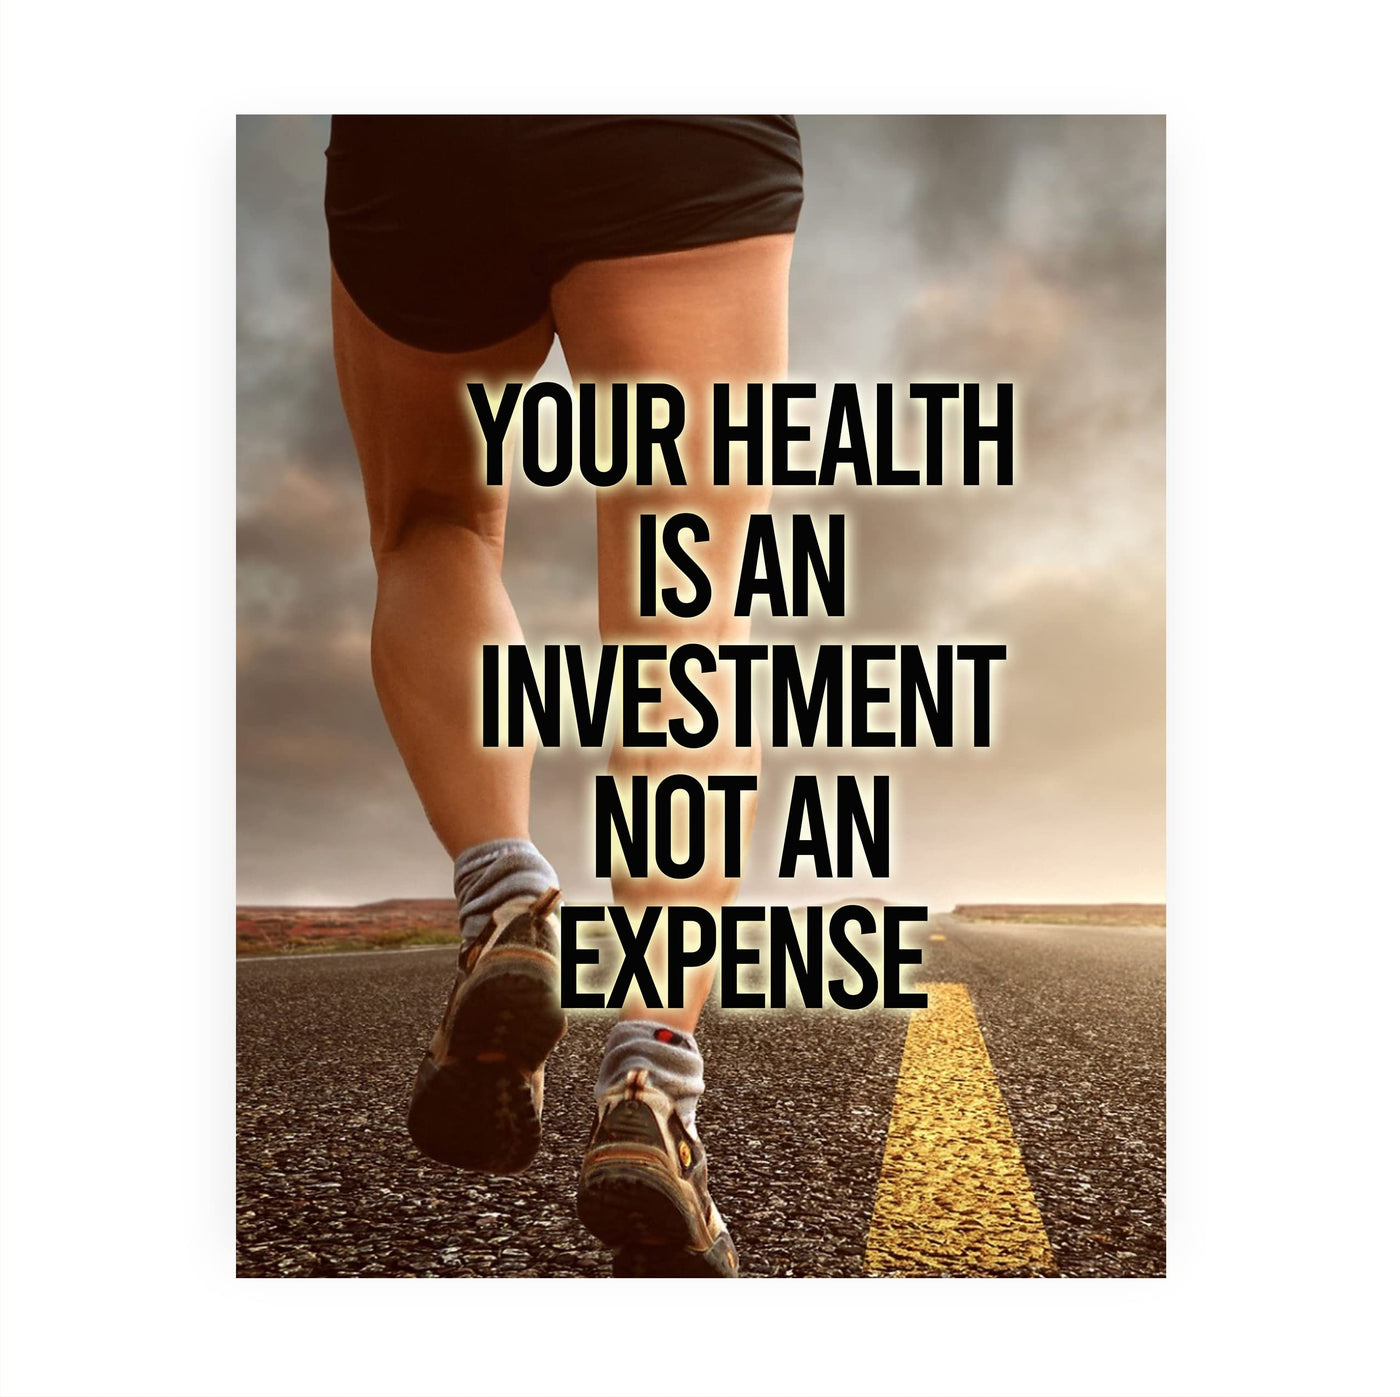 Your Health Is An Investment- Motivational Exercise Sign -8 x 10" Wall Print -Ready to Frame. Modern Fitness Print for Home-Office-Gym-Yoga Studio-Locker Room Decor. Great Gift of Motivation!